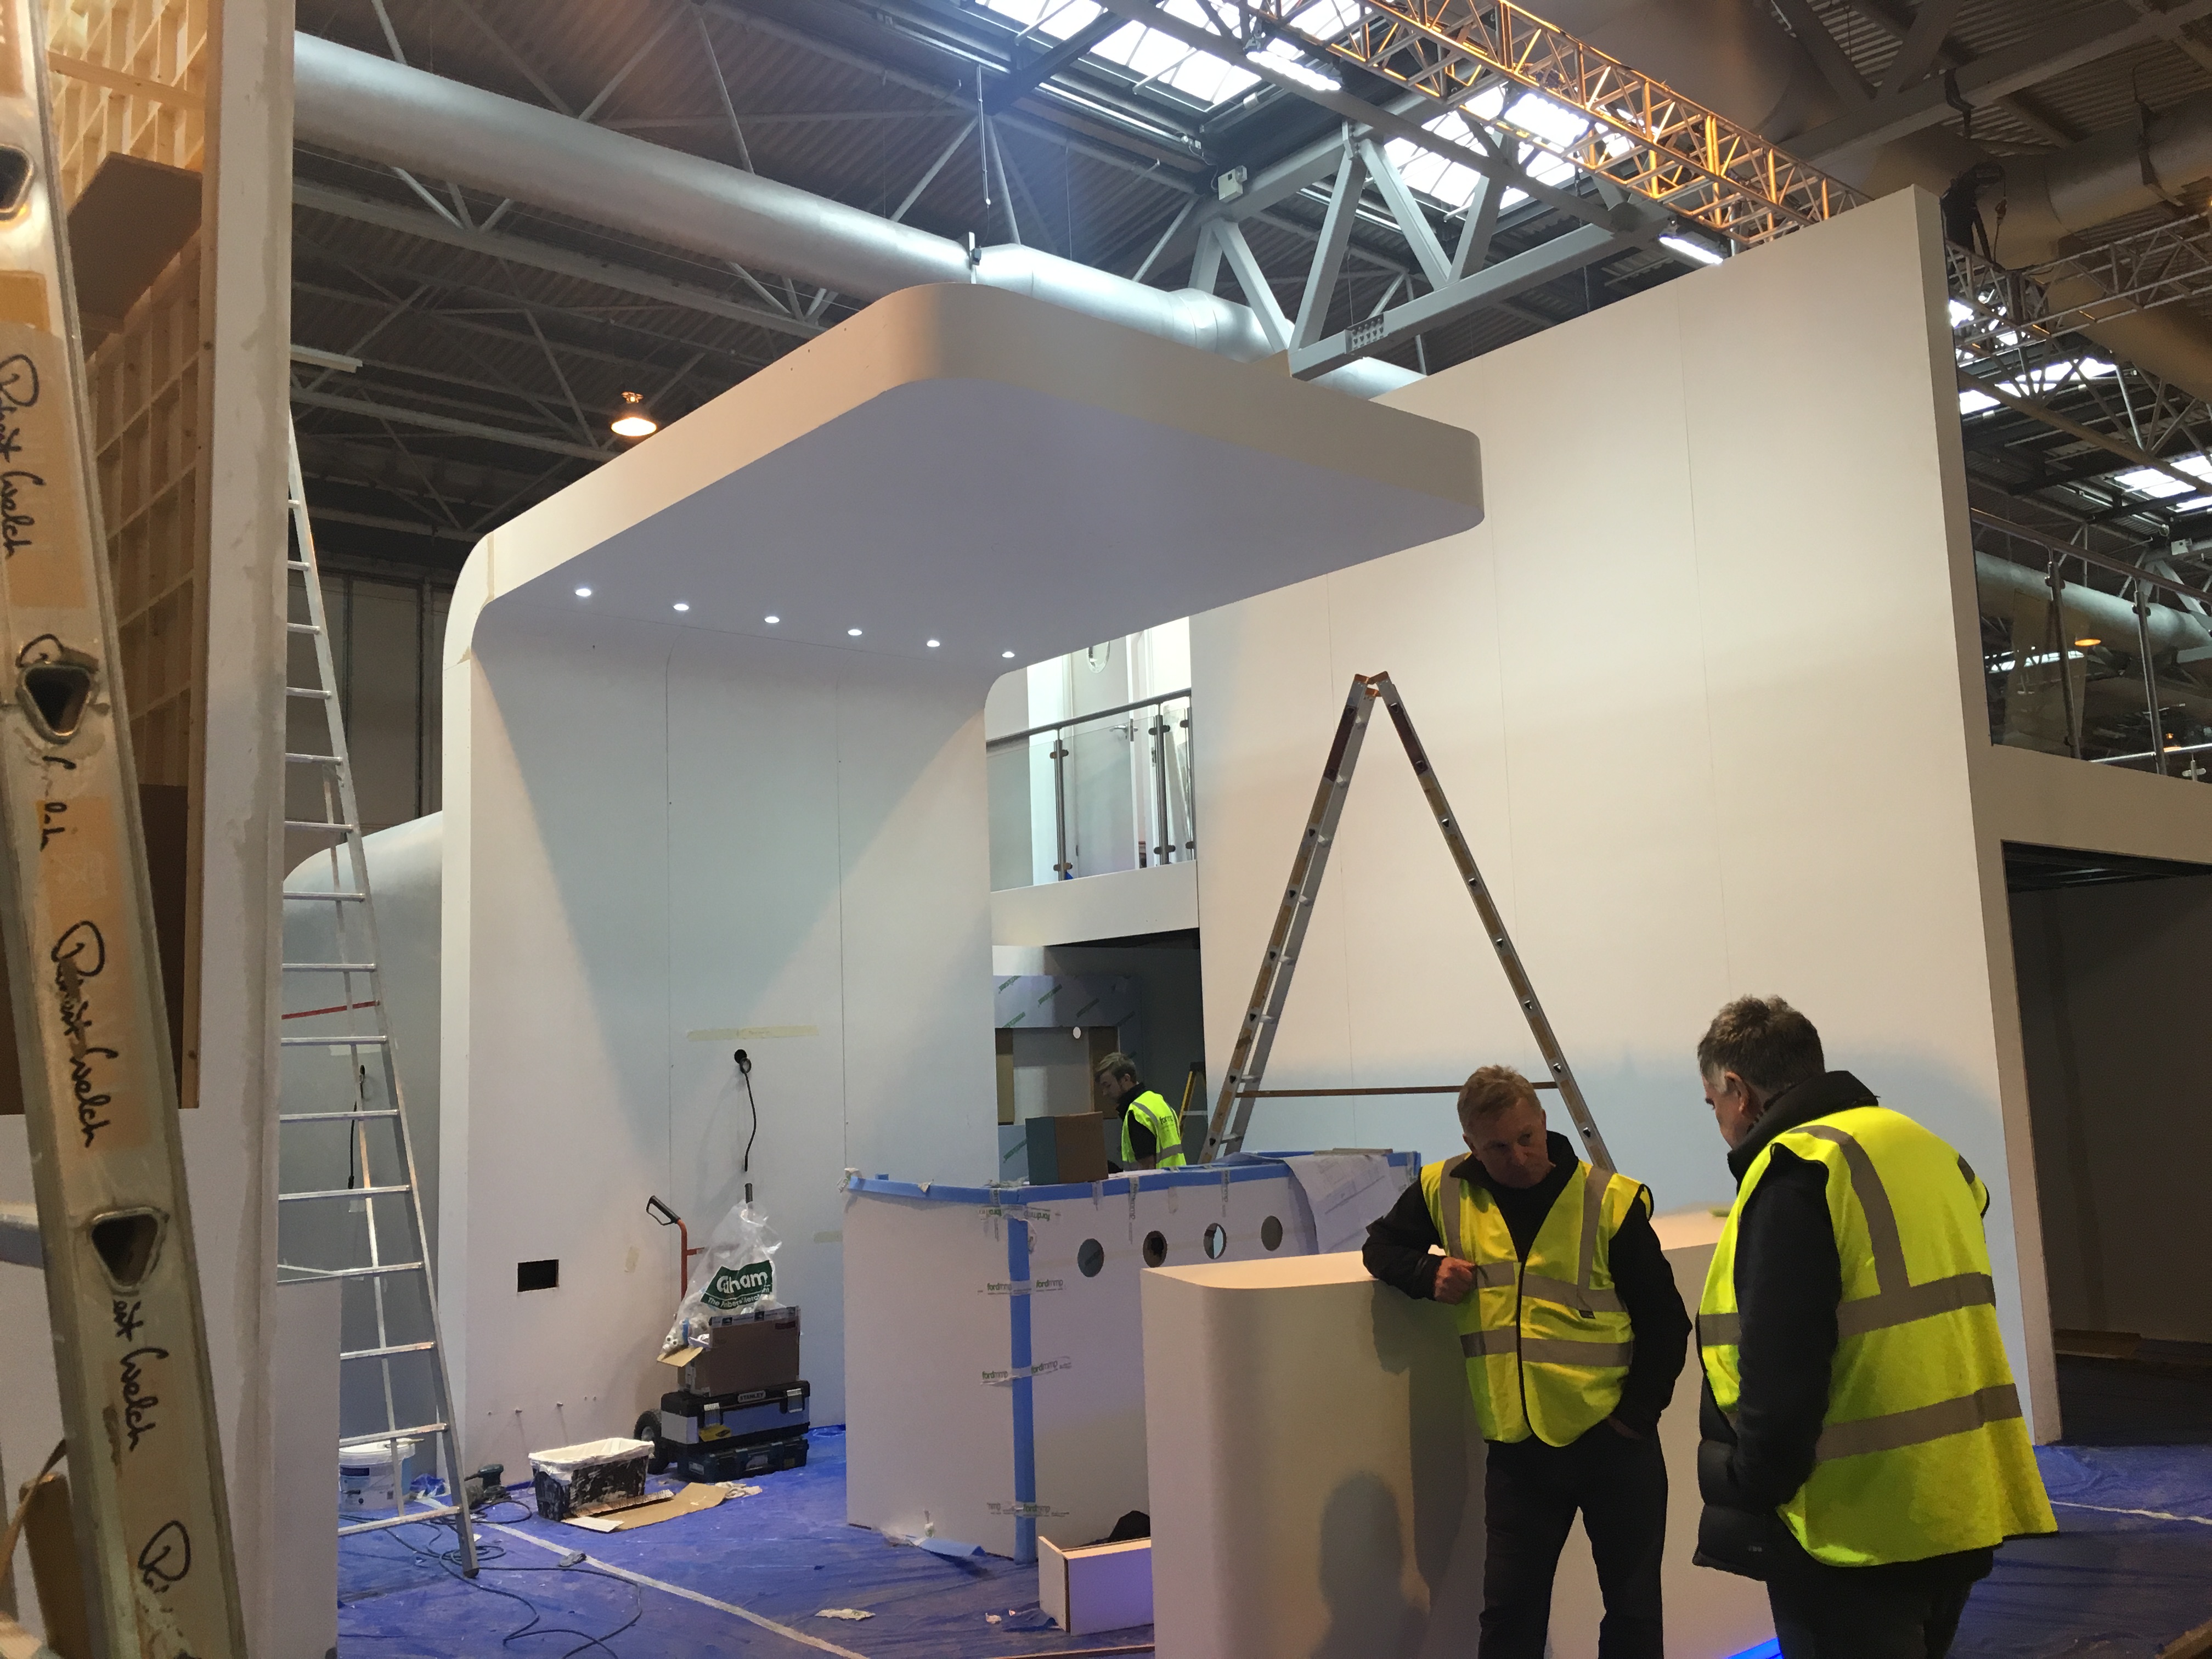 Ford MMP build exhibition stands for Ideal Standard and Sottini